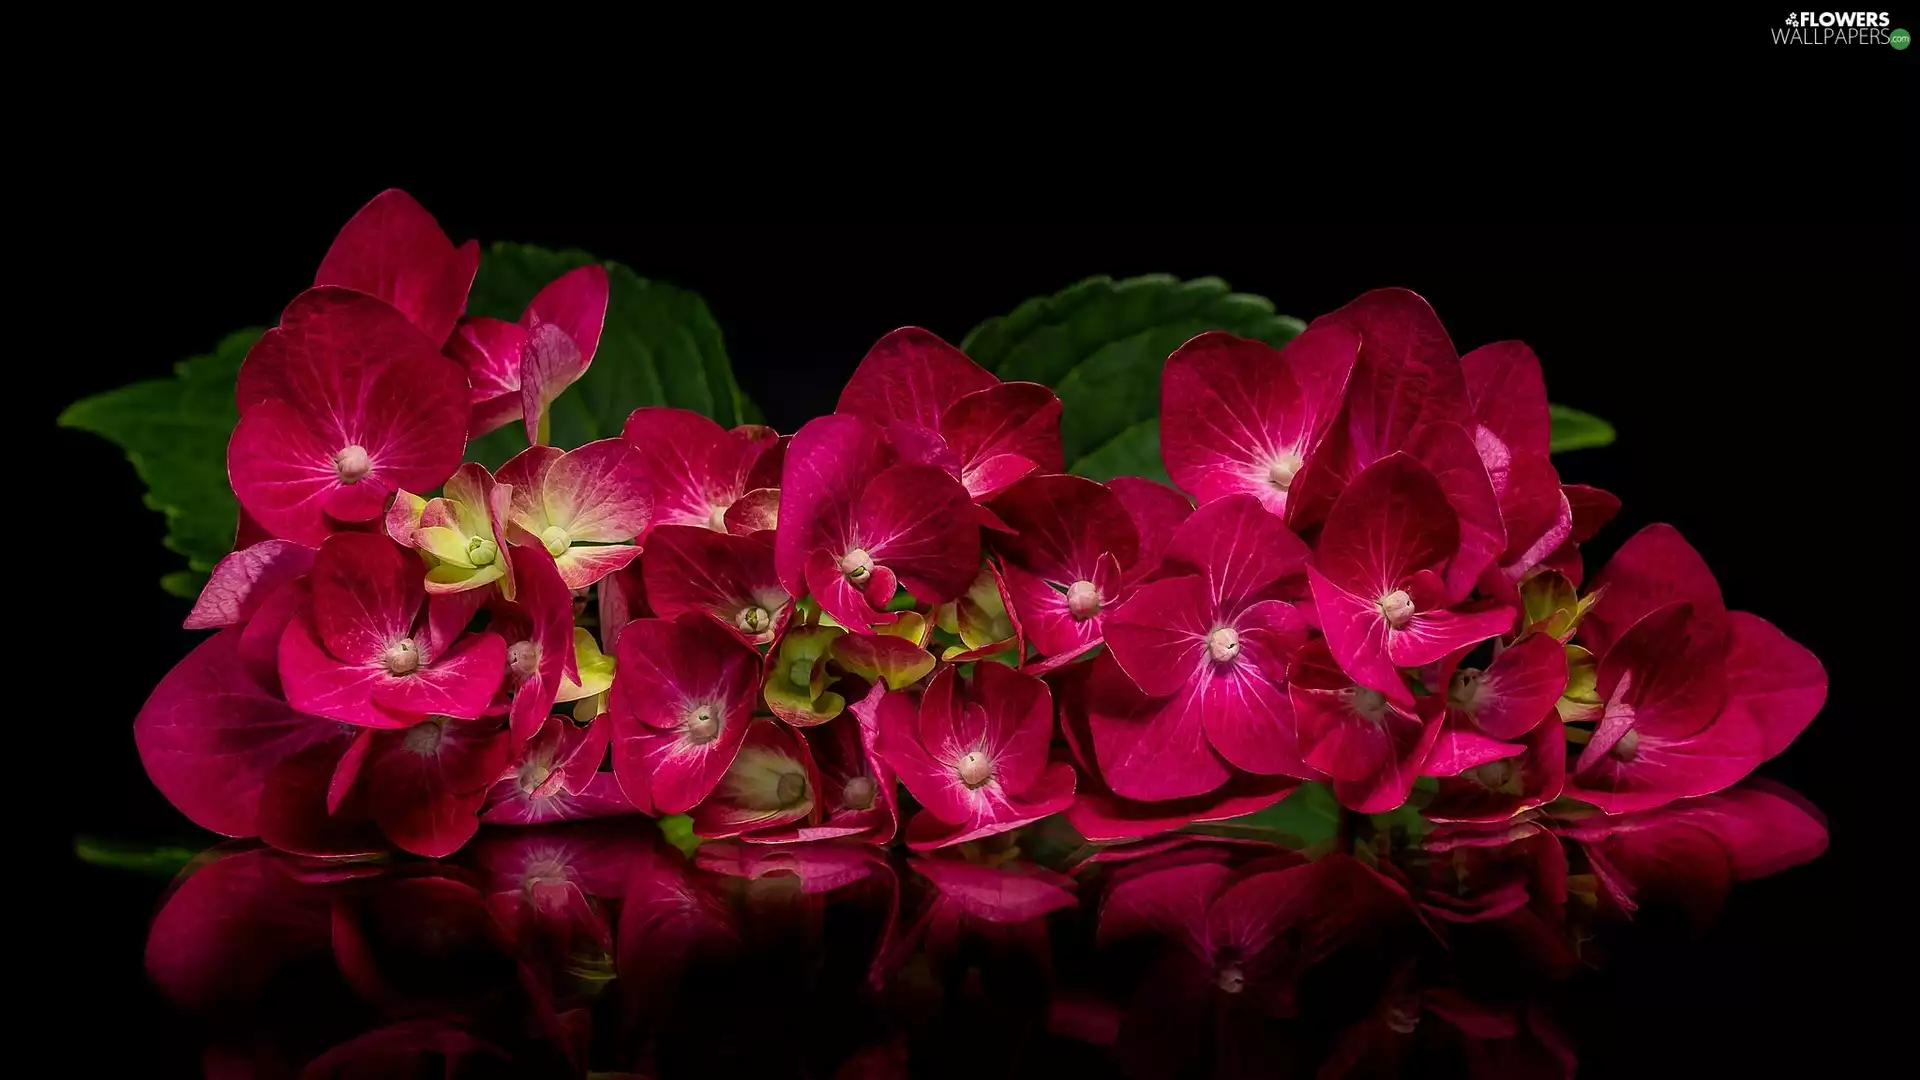 Leaf, reflection, hydrangea, red hot, Colourfull Flowers